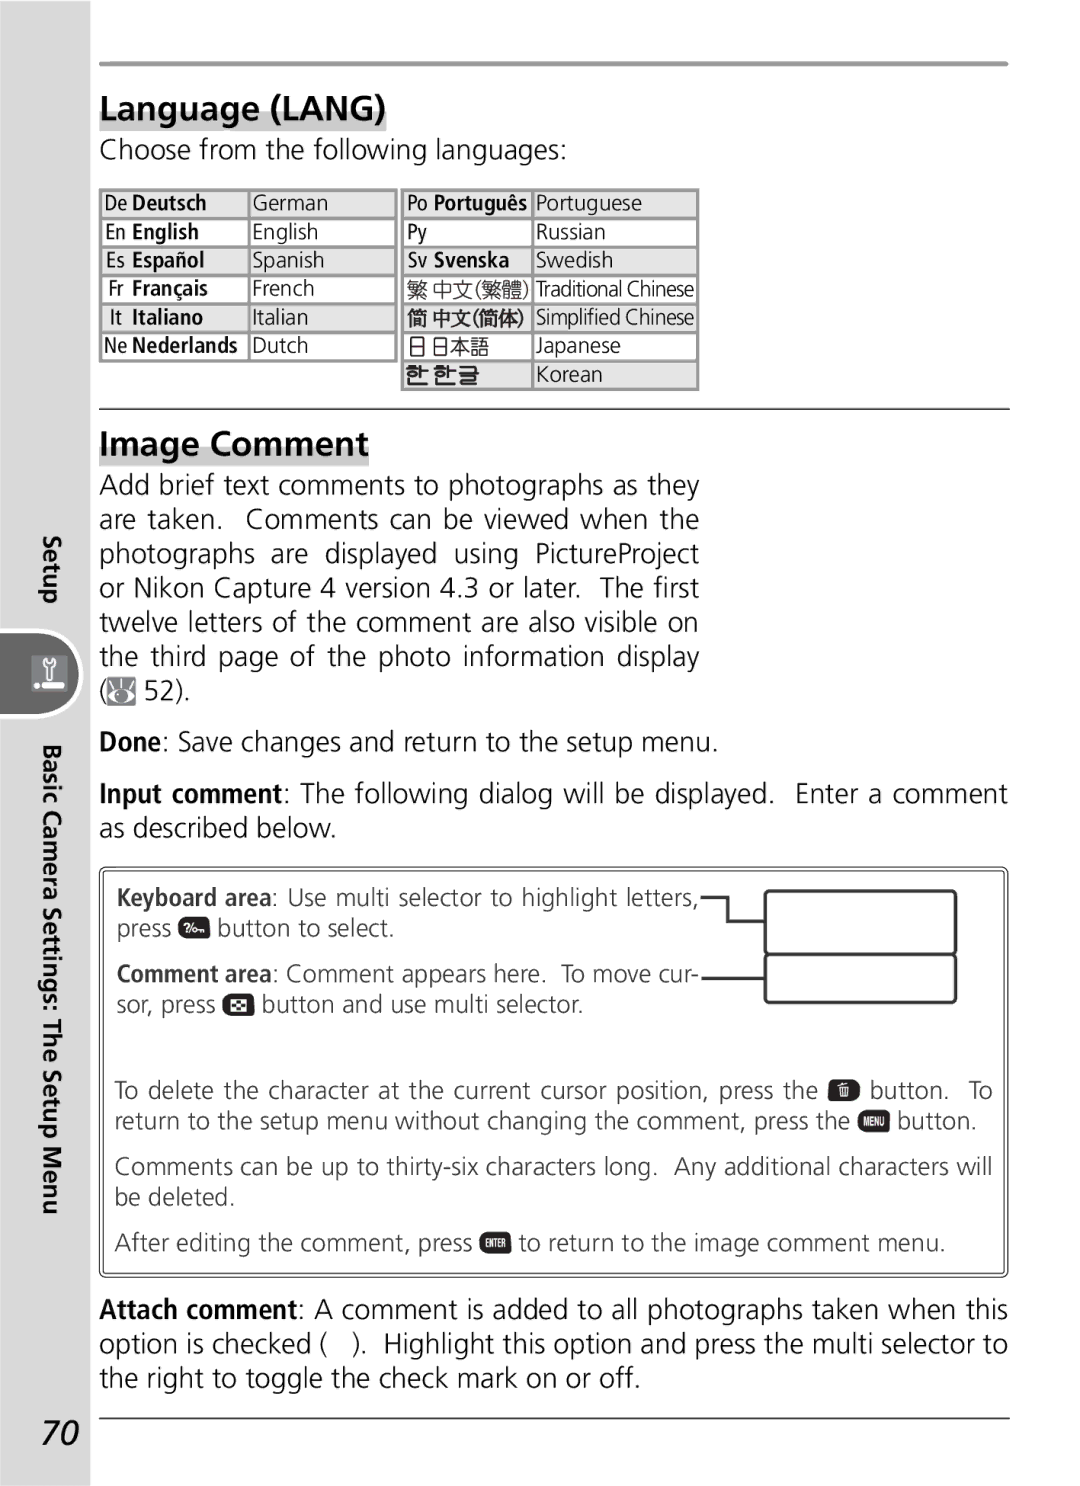 Nikon D50 manual Language Lang, Image Comment, Choose from the following languages 